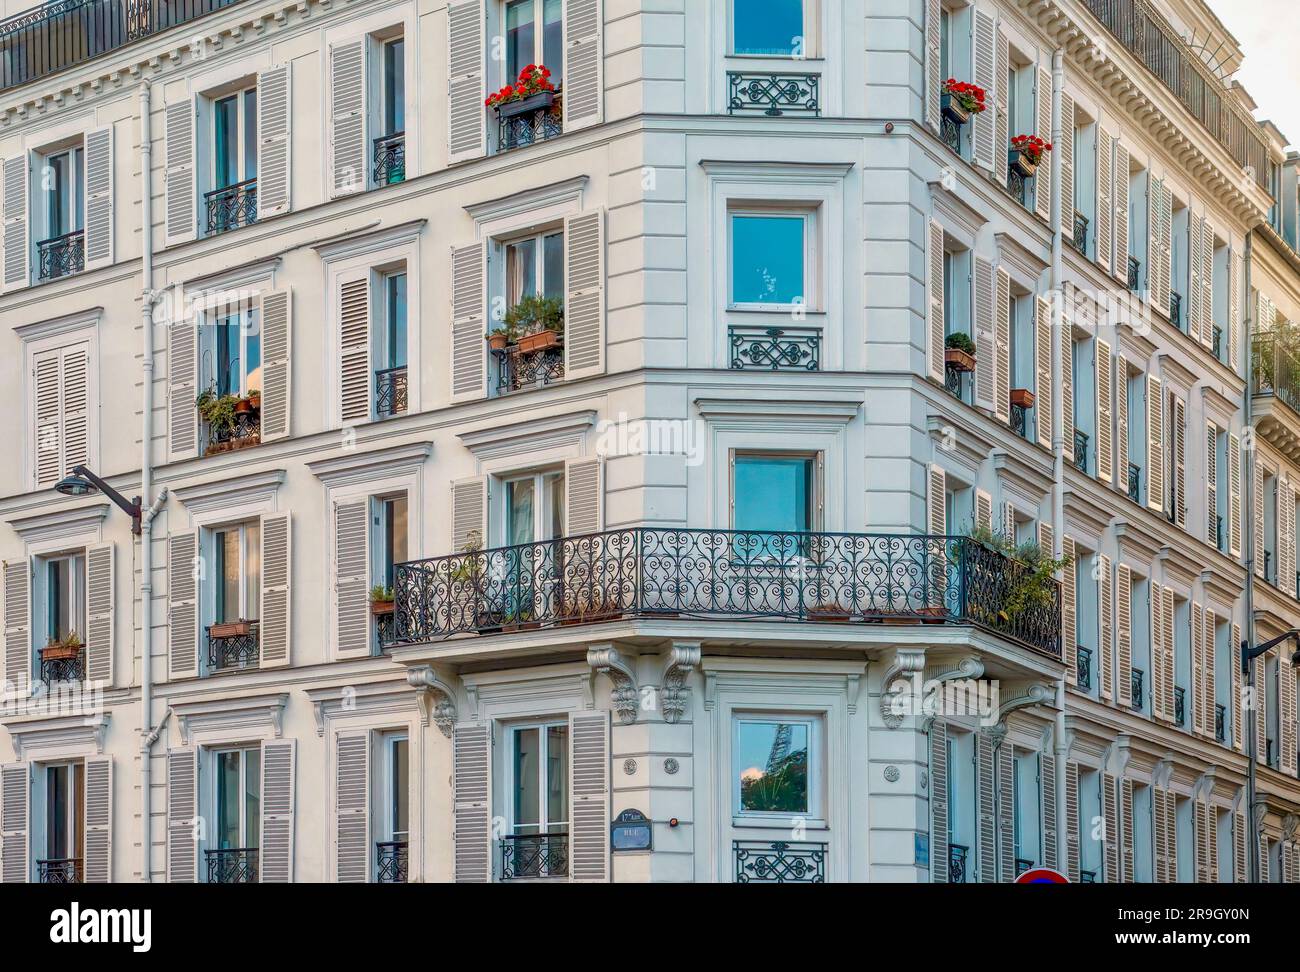 Elegant facade of an old traditional Parisian apartment building with ornate wrought iron railings and wooden window shutters in a residential area. Stock Photo